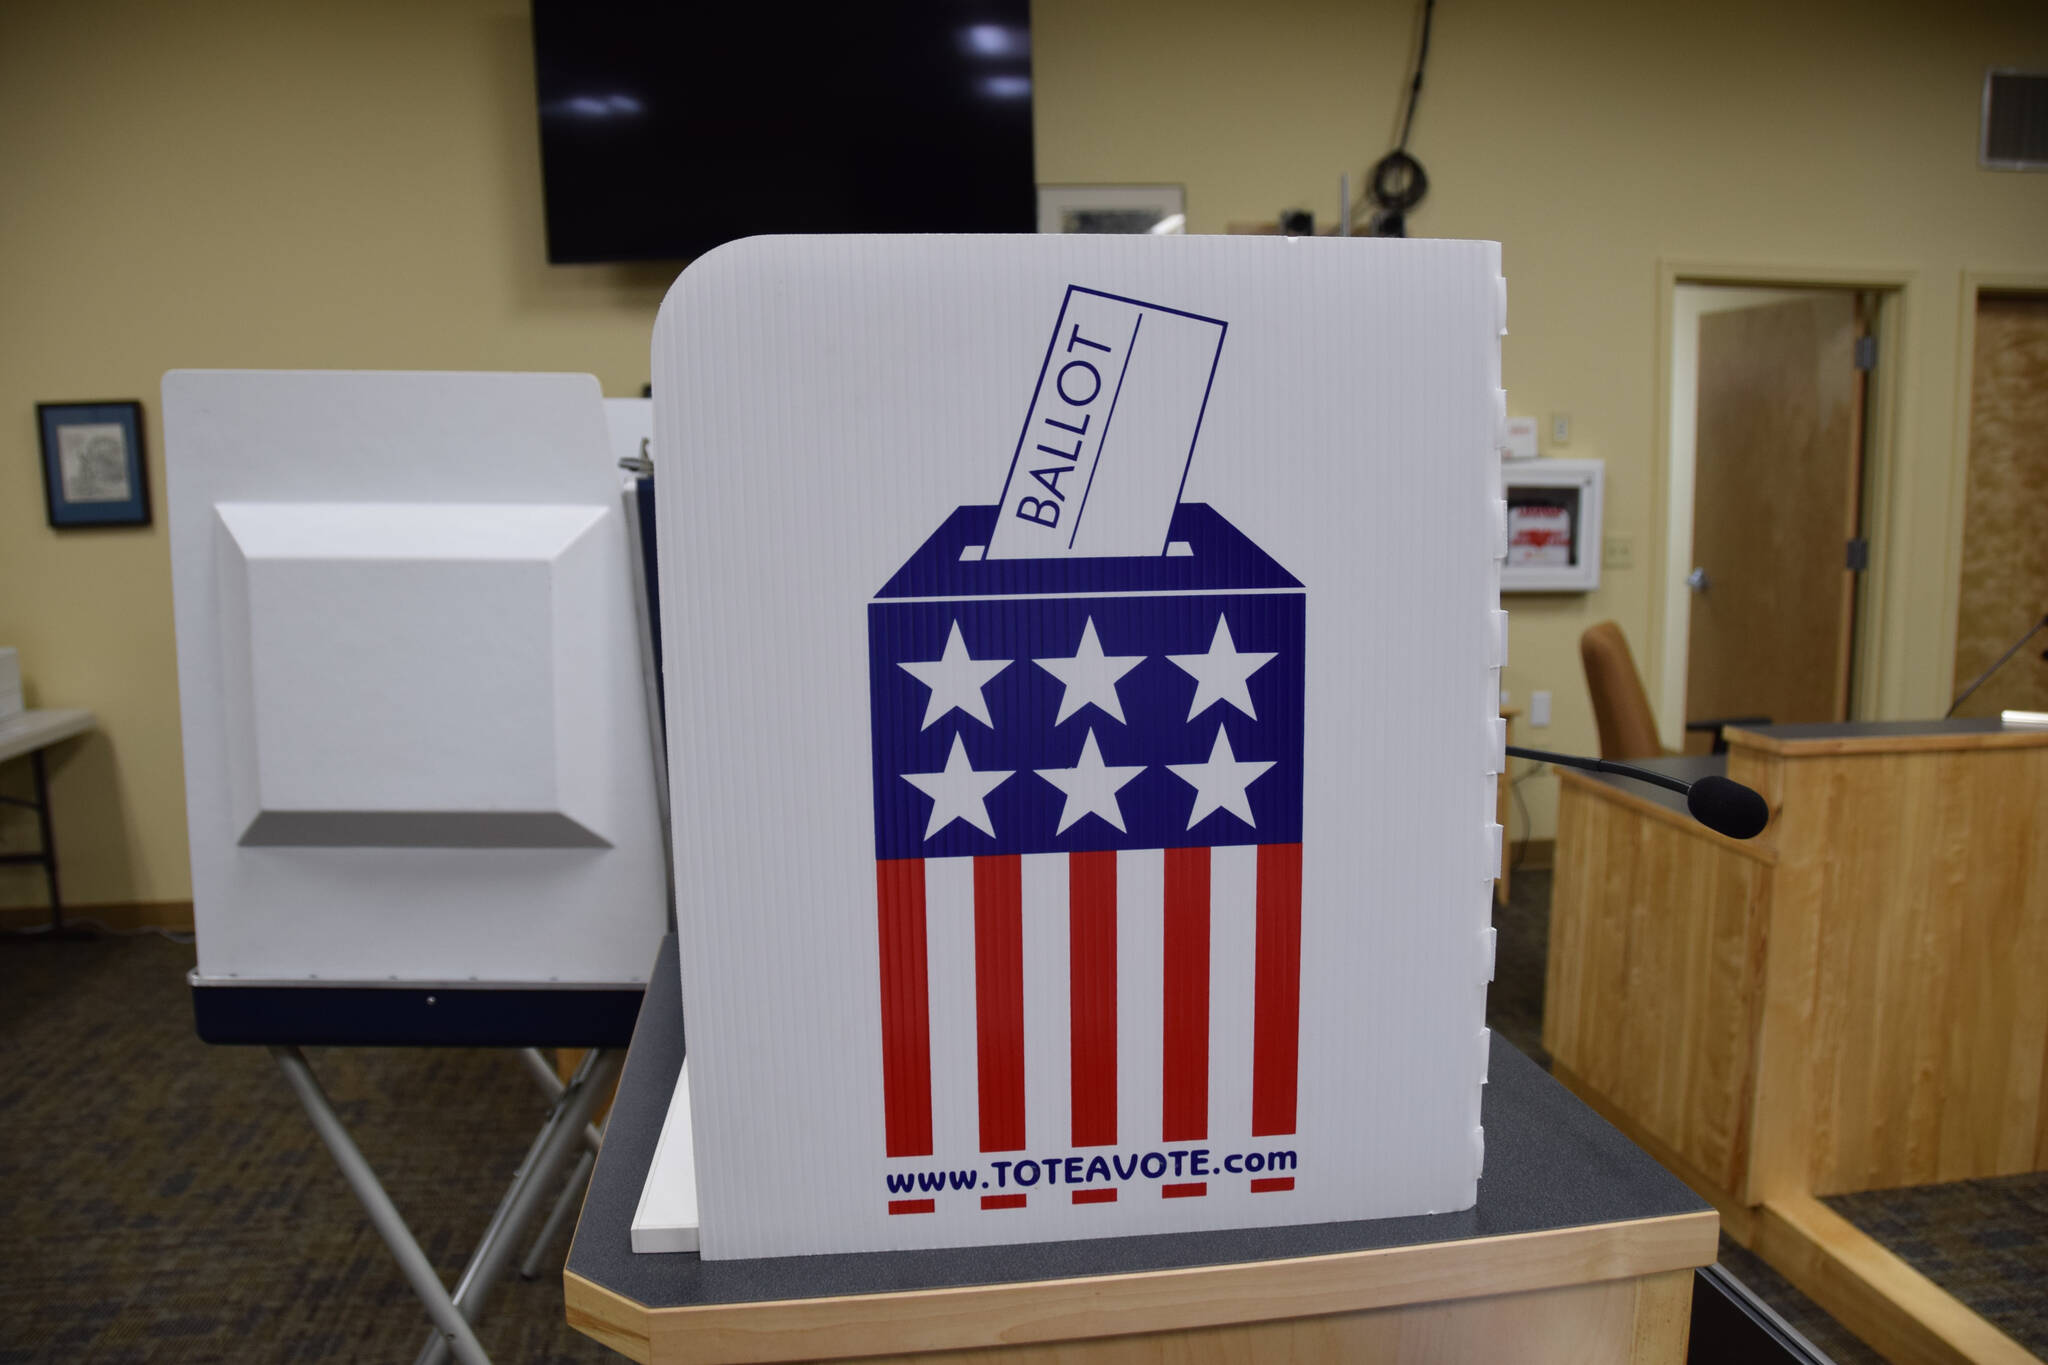 A voting booth for the Kenai Peninsula Borough and City of Homer elections at Cowles Council Chambers on Tuesday, Oct. 4, 2022, in Homer, Alaska. (Photo by Charlie Menke/ Homer News)